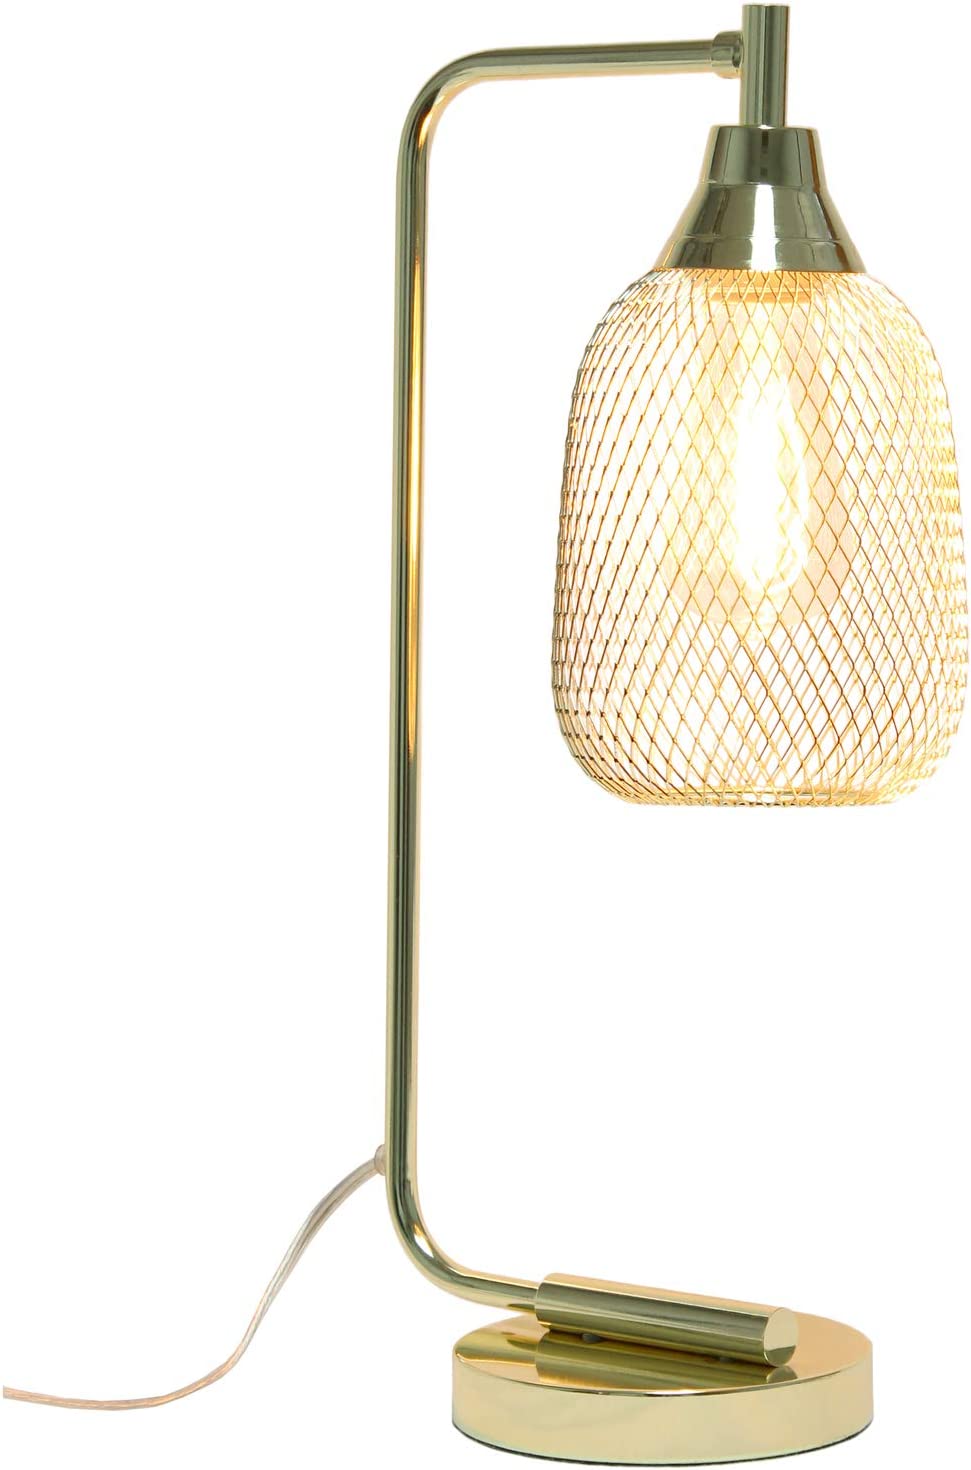 Lalia Home Industrial Office Desk Lamp with Wired Mesh Shade and Polished Gold Finish